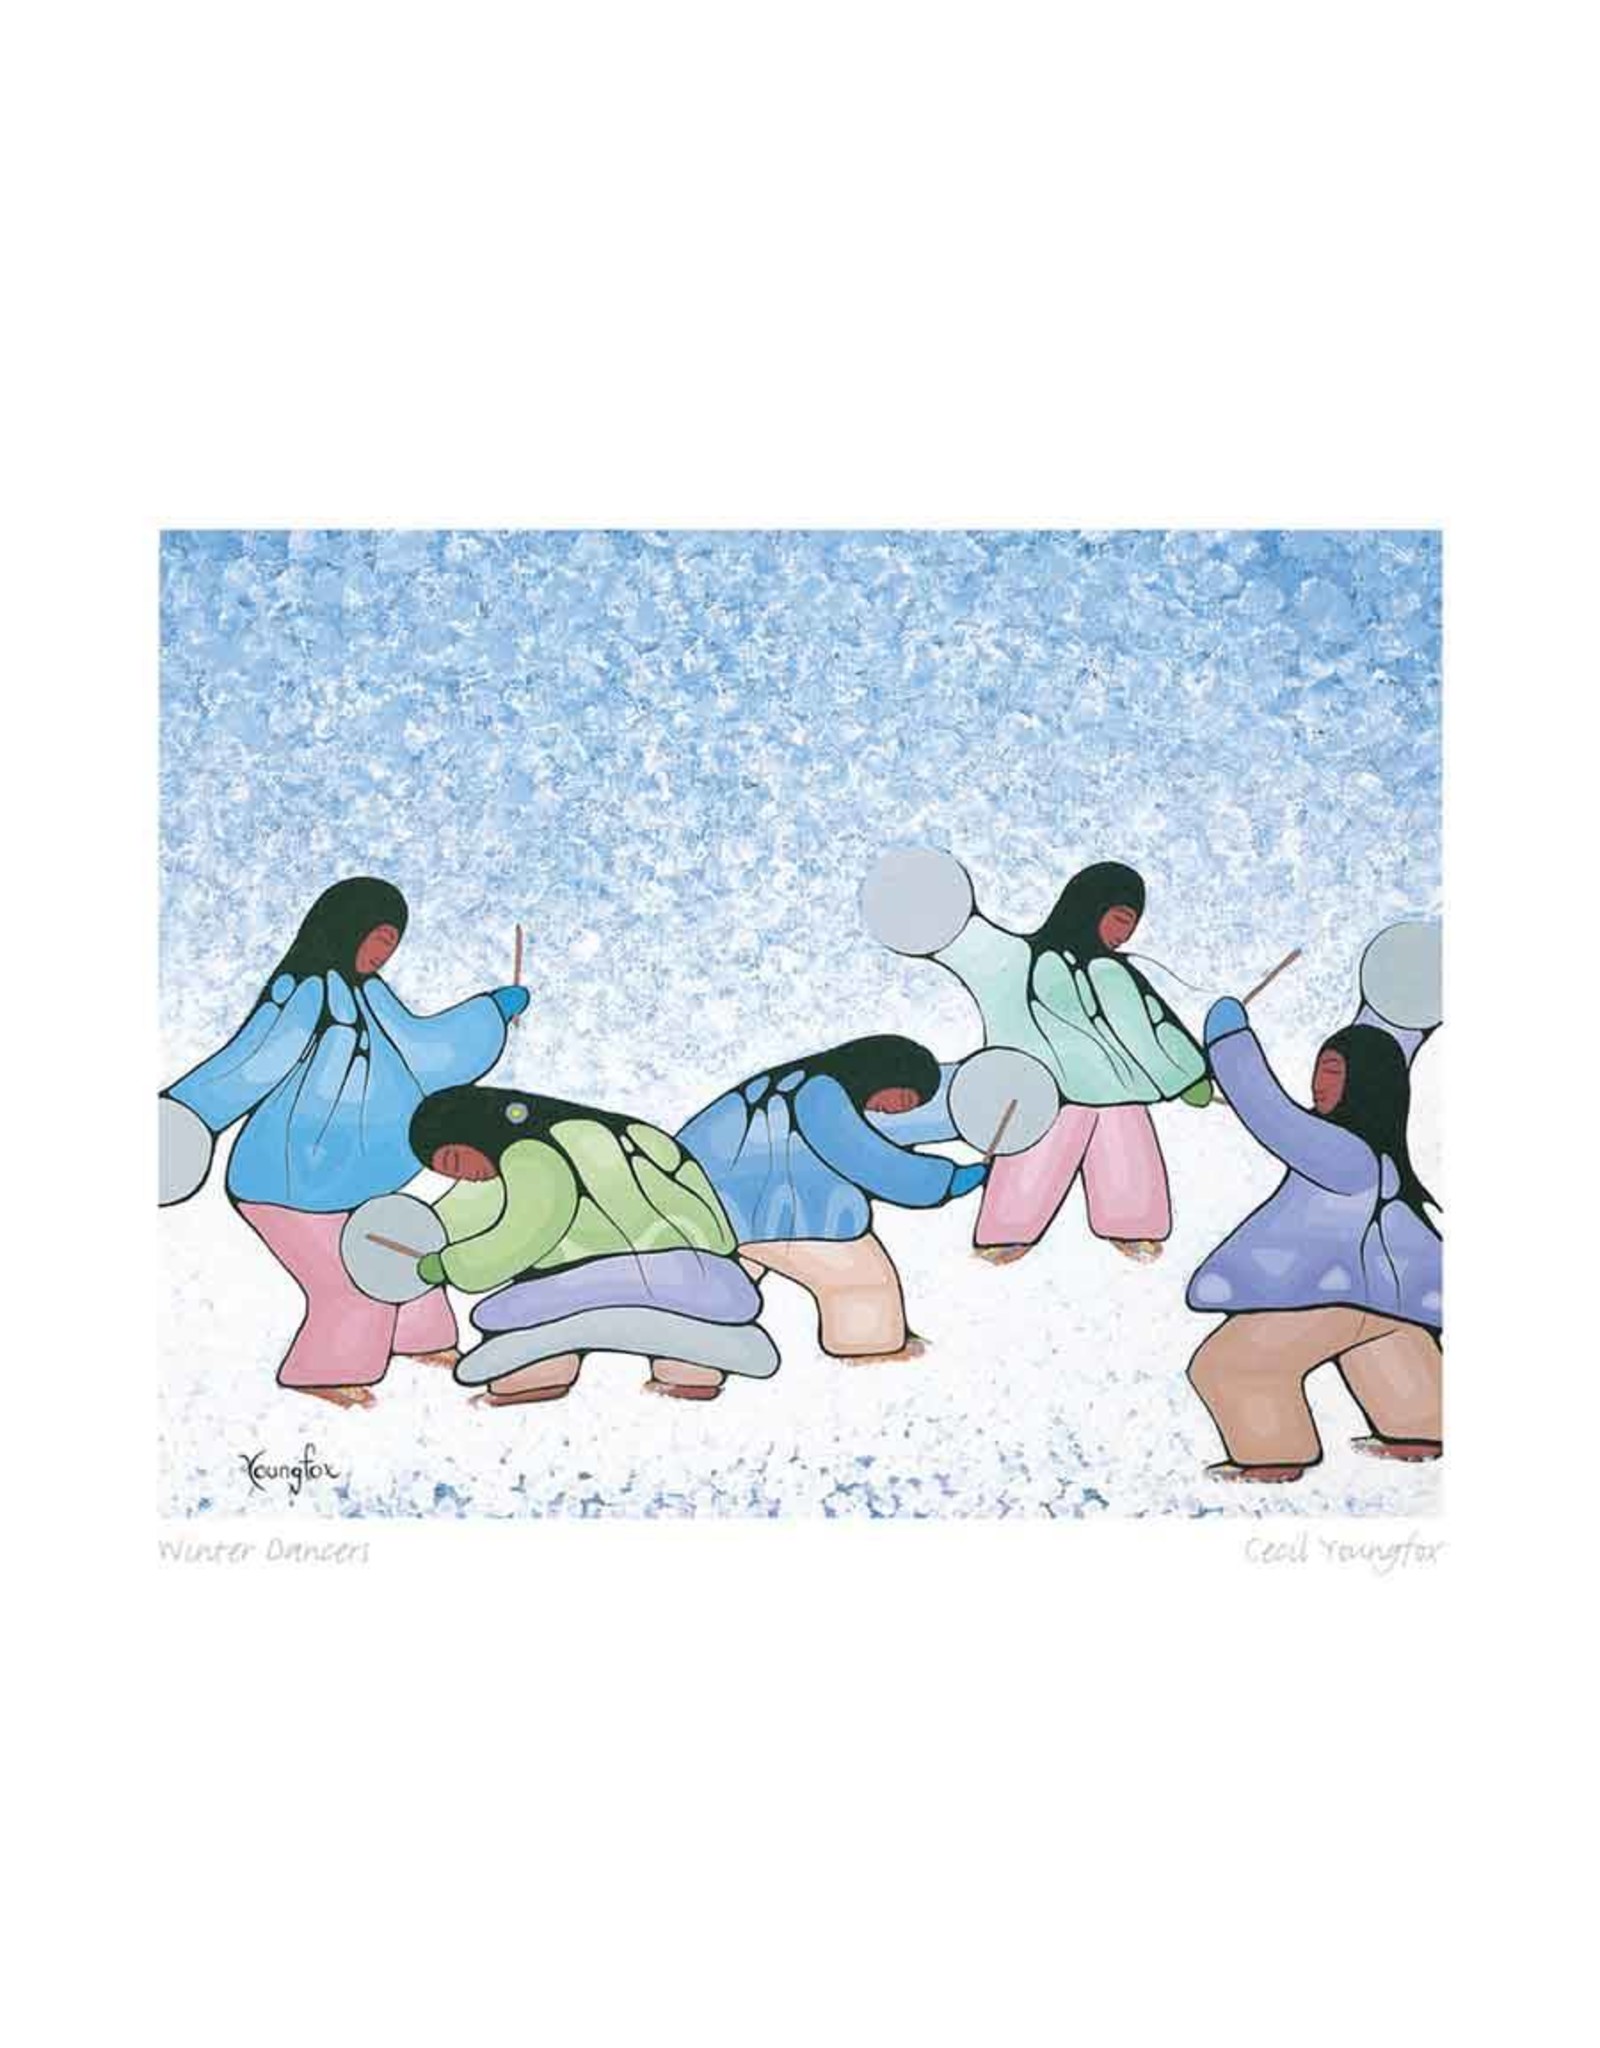 Winter Dancers by Cecil Youngfox Matted